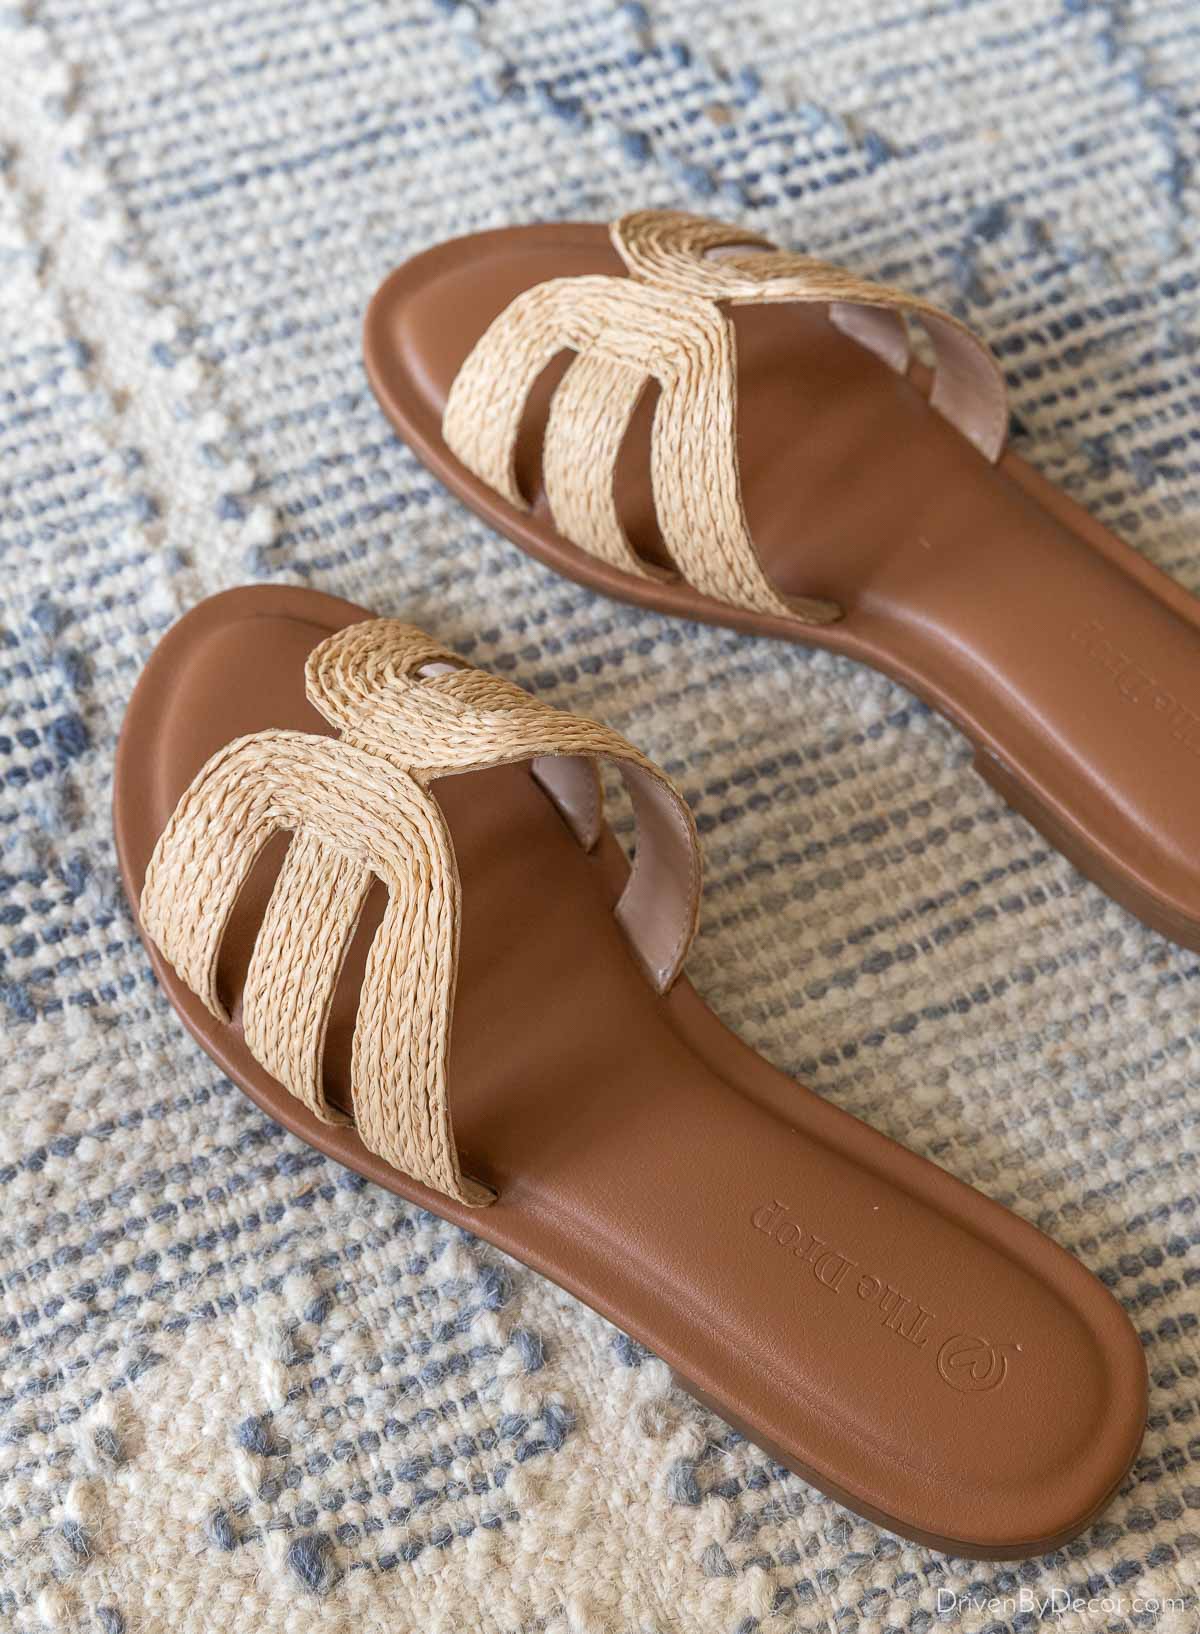 Favorite woven sandals that go with everything!